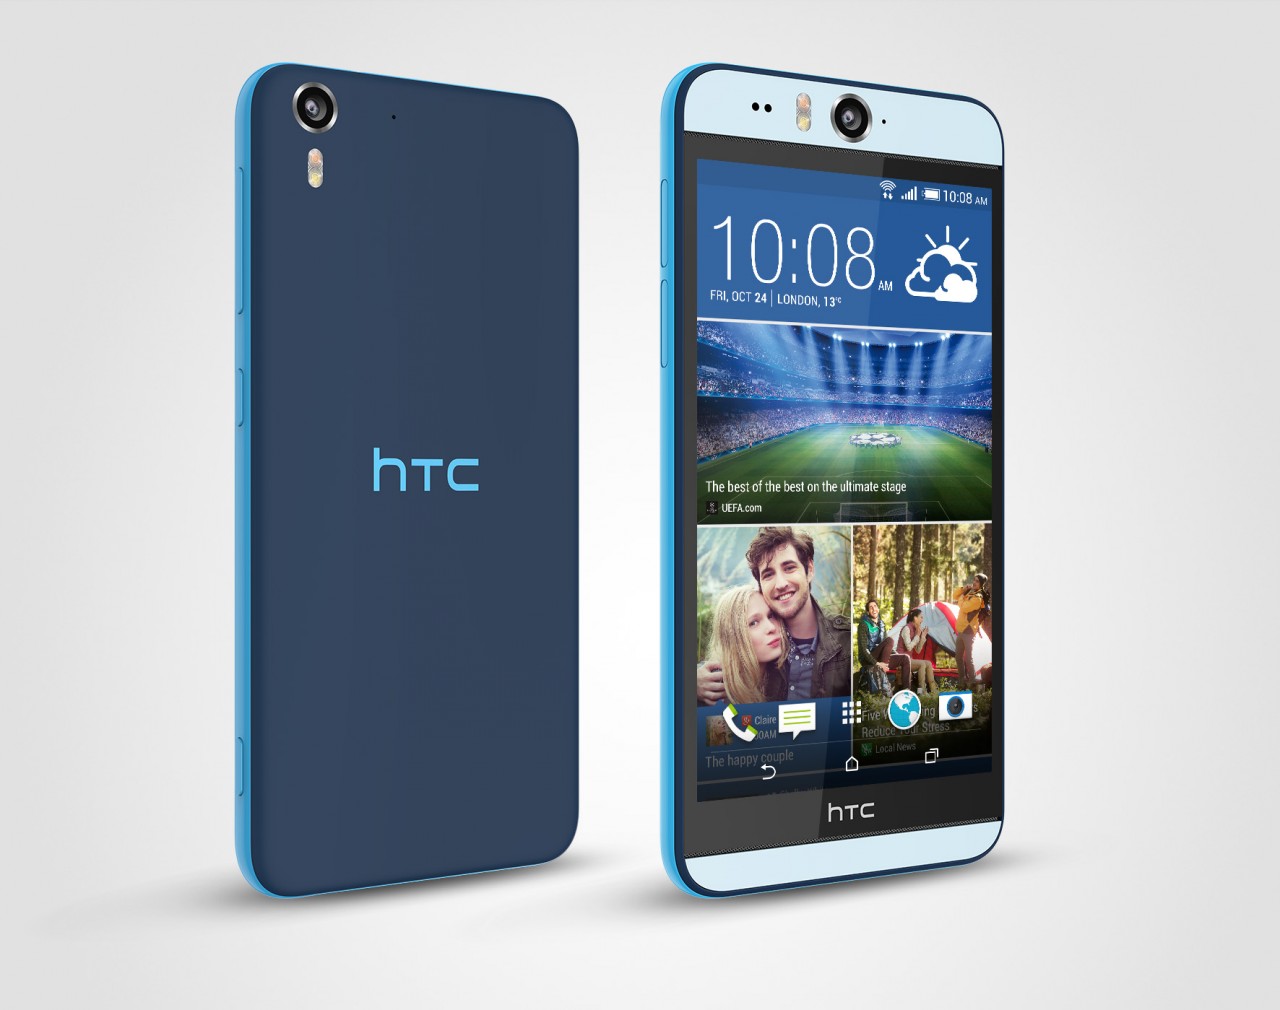 HTC Desire Eye 13MP Camera phone coming to Three Exclusively in the UK